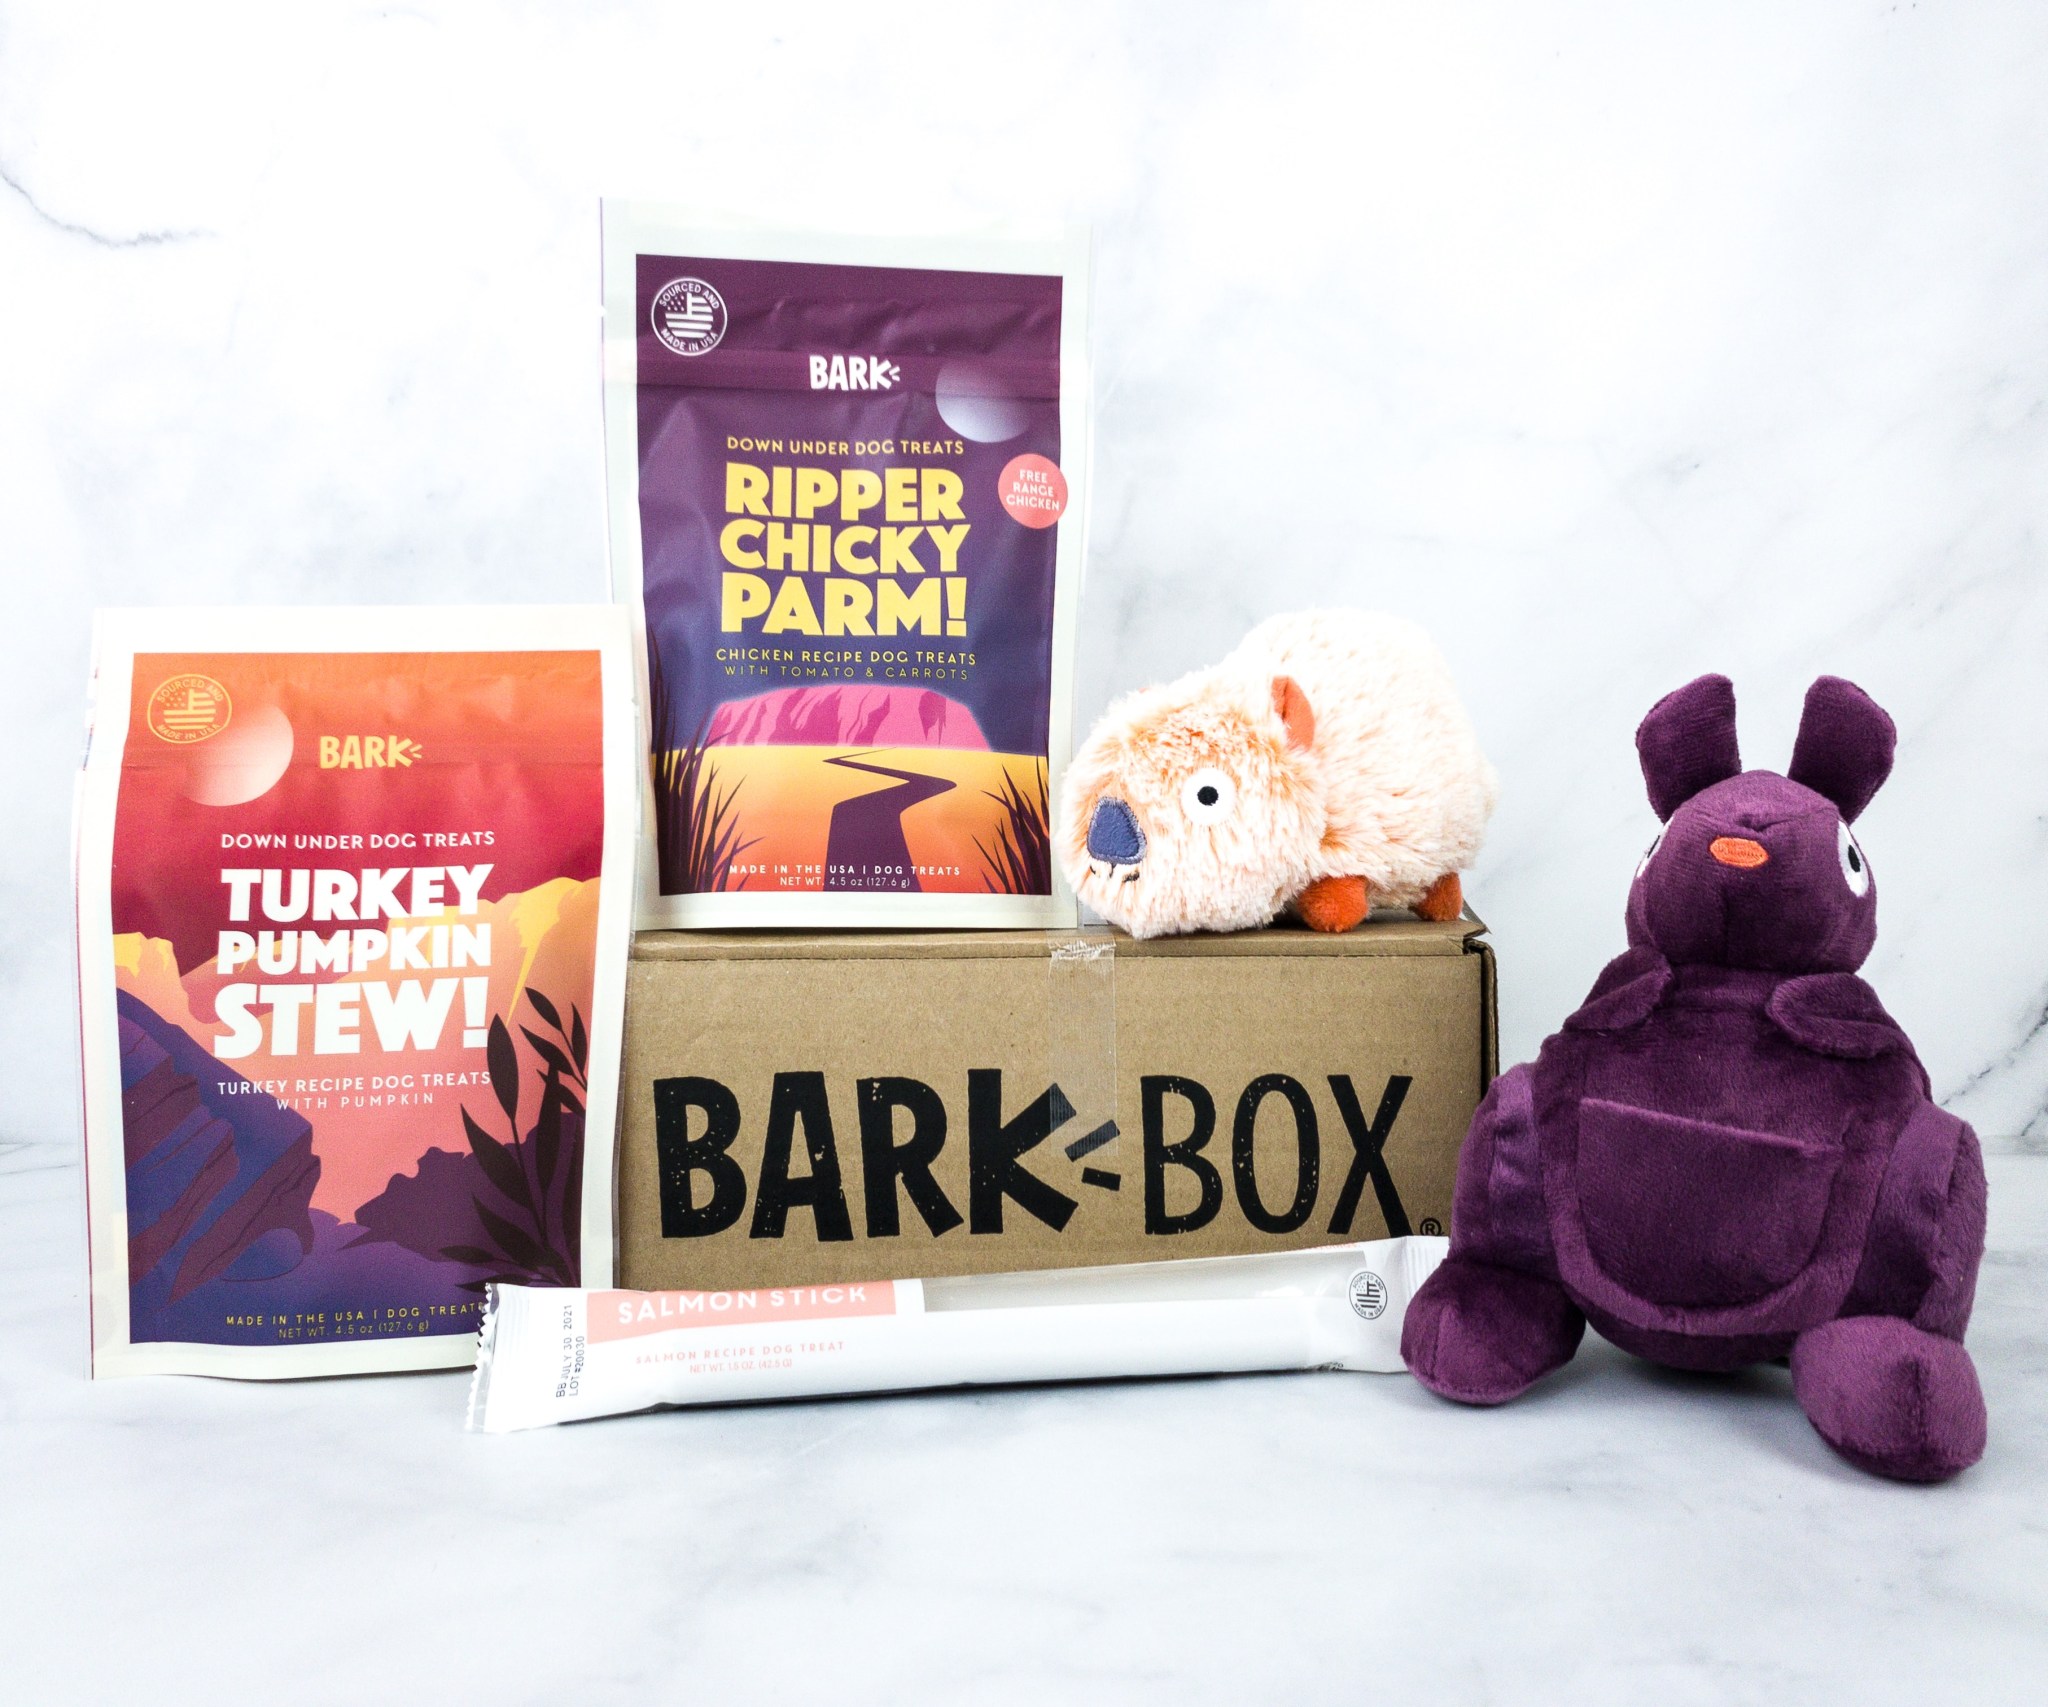 Barkbox Reviews Get All The Details At Hello Subscription!